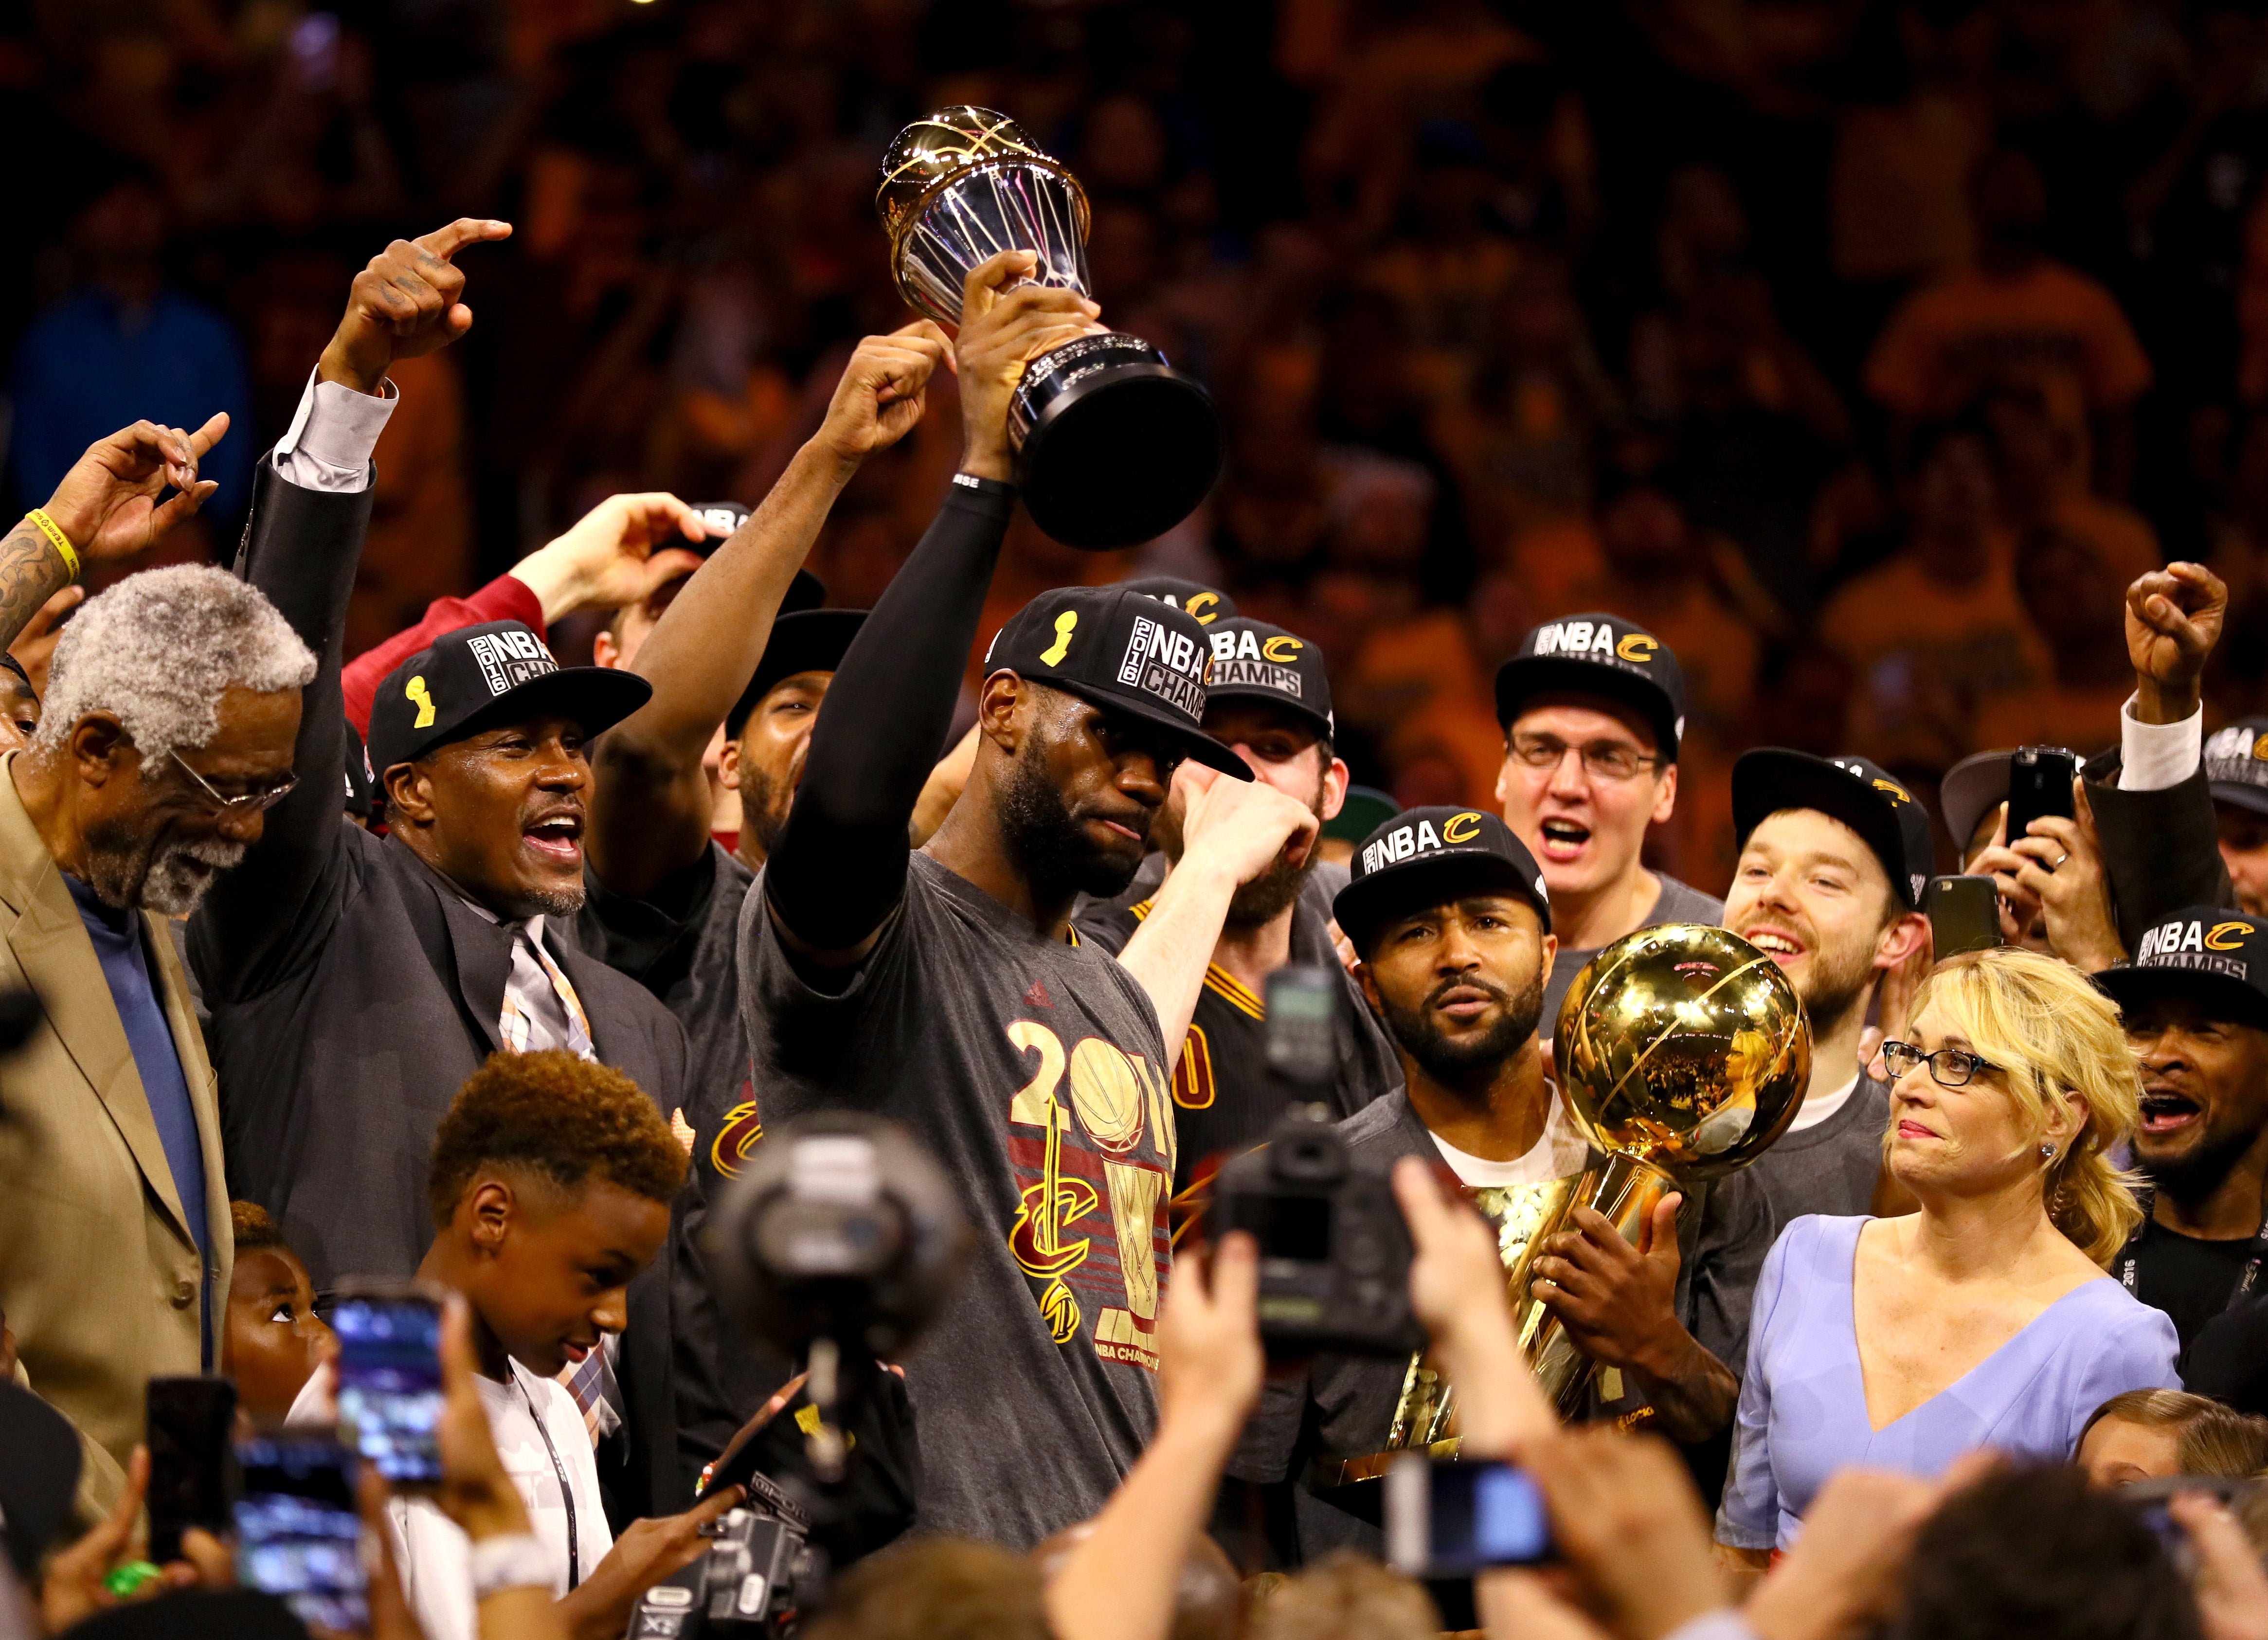 Kyrie Irving and Kevin Love Make Fulfilling Playoff Returns - The